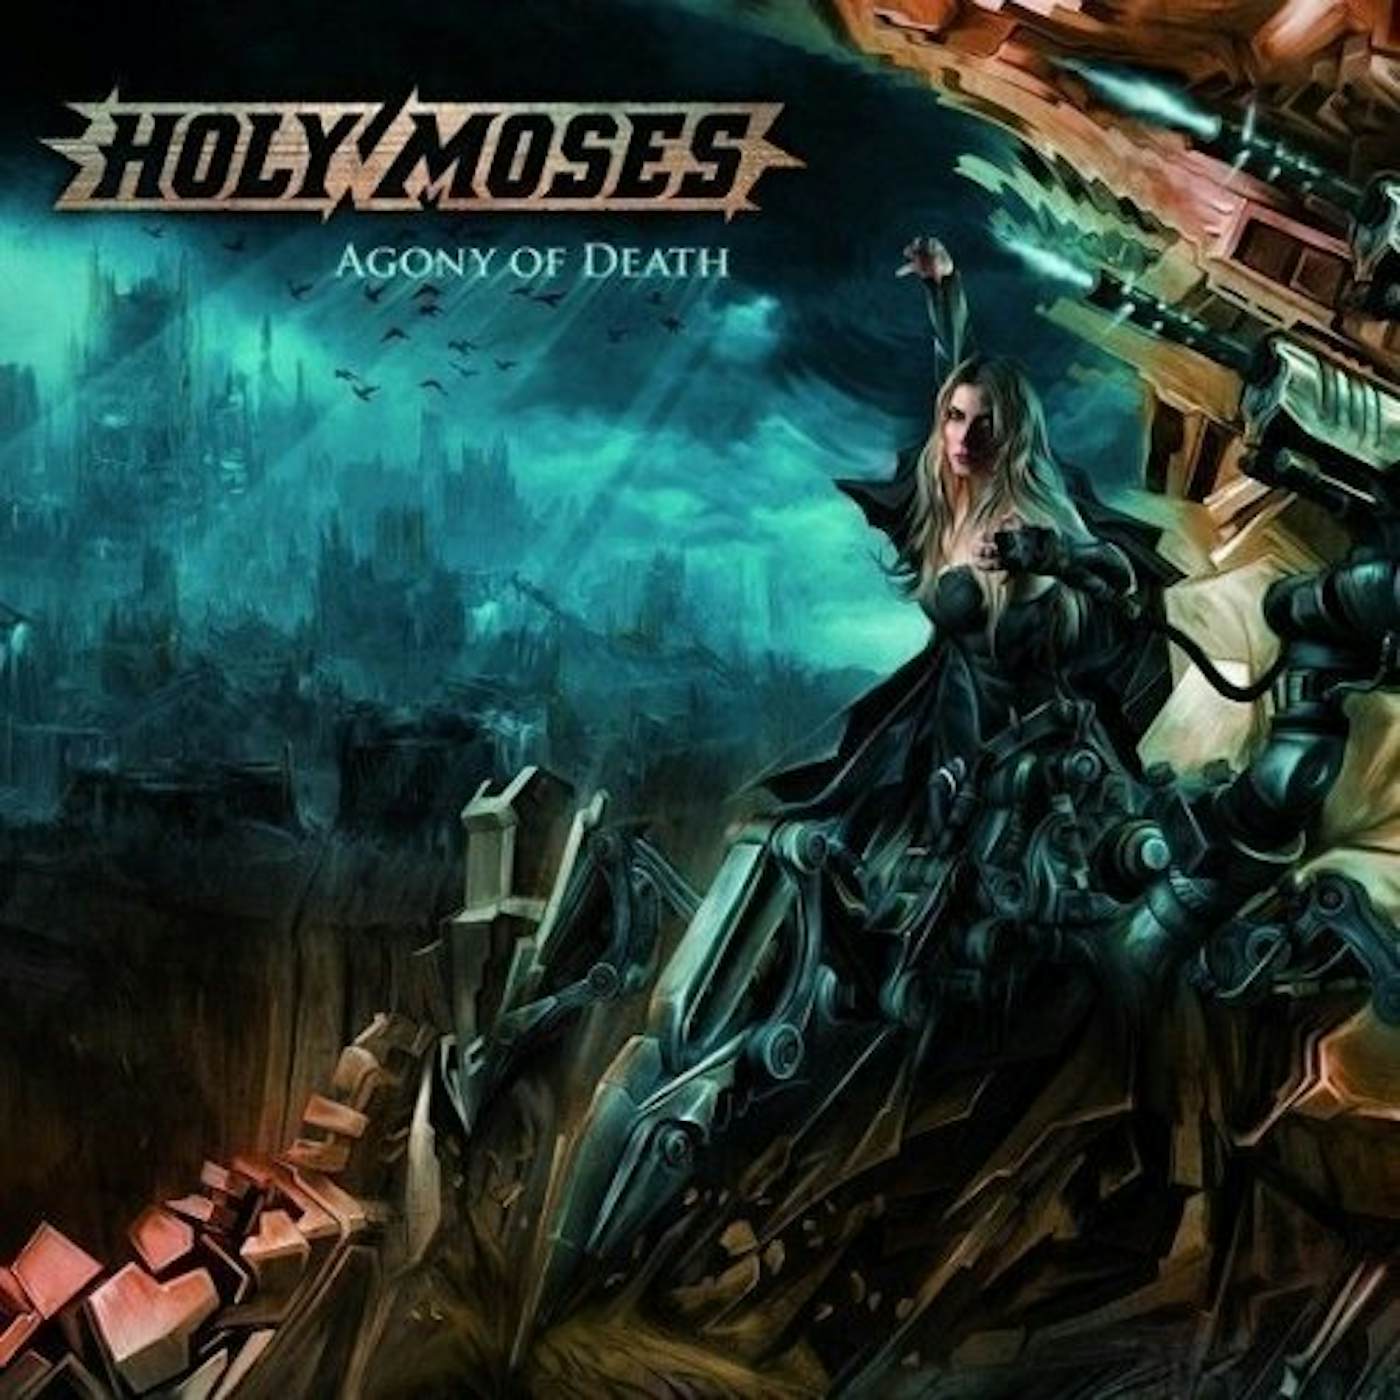 Holy Moses Agony Of Death Vinyl Record